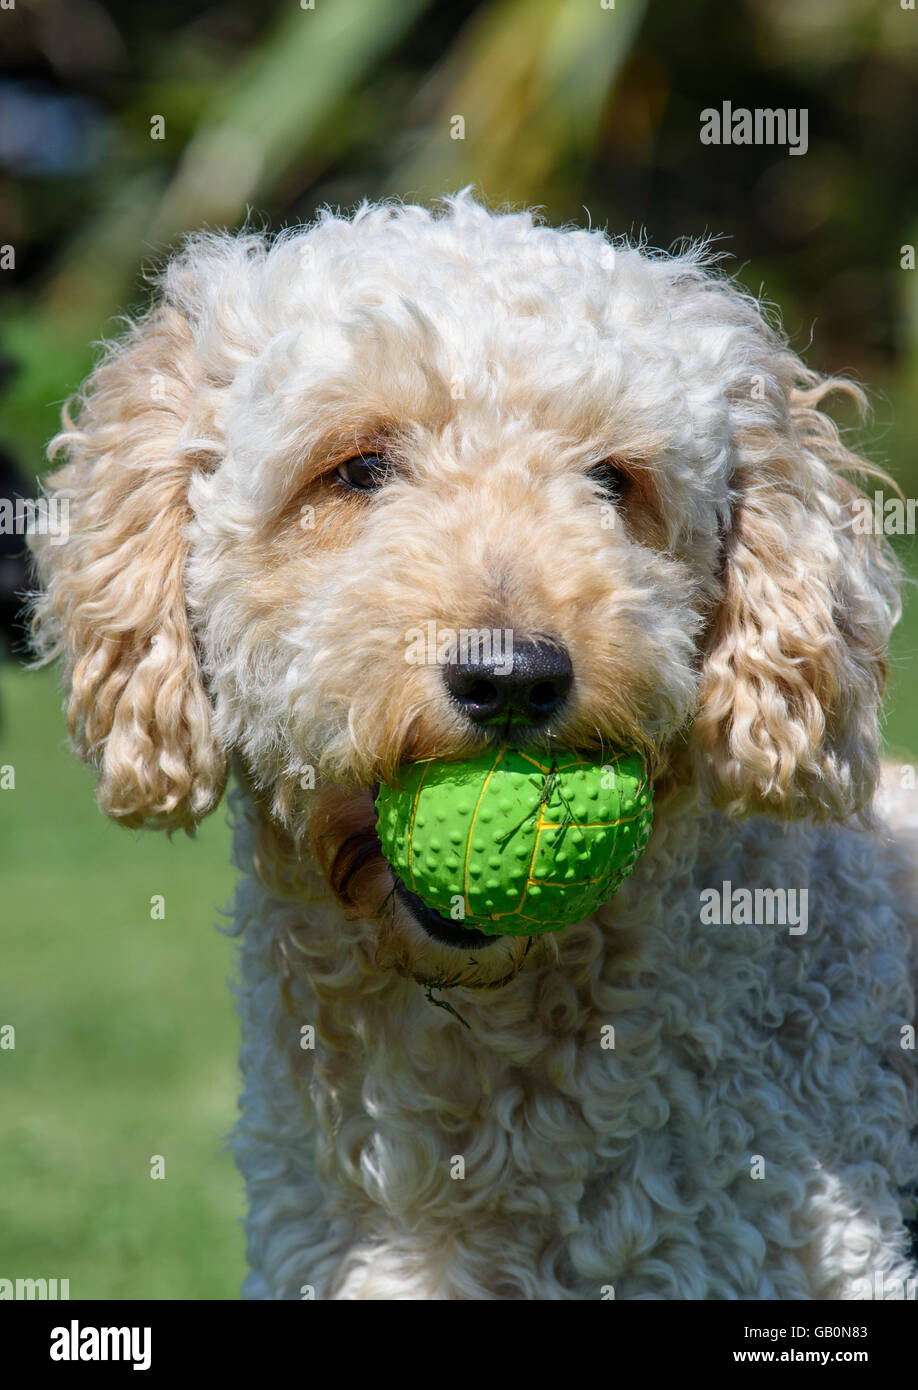 Cute Labradoodle dog with green ball in it's mouth, facing towards the camera Stock Photo